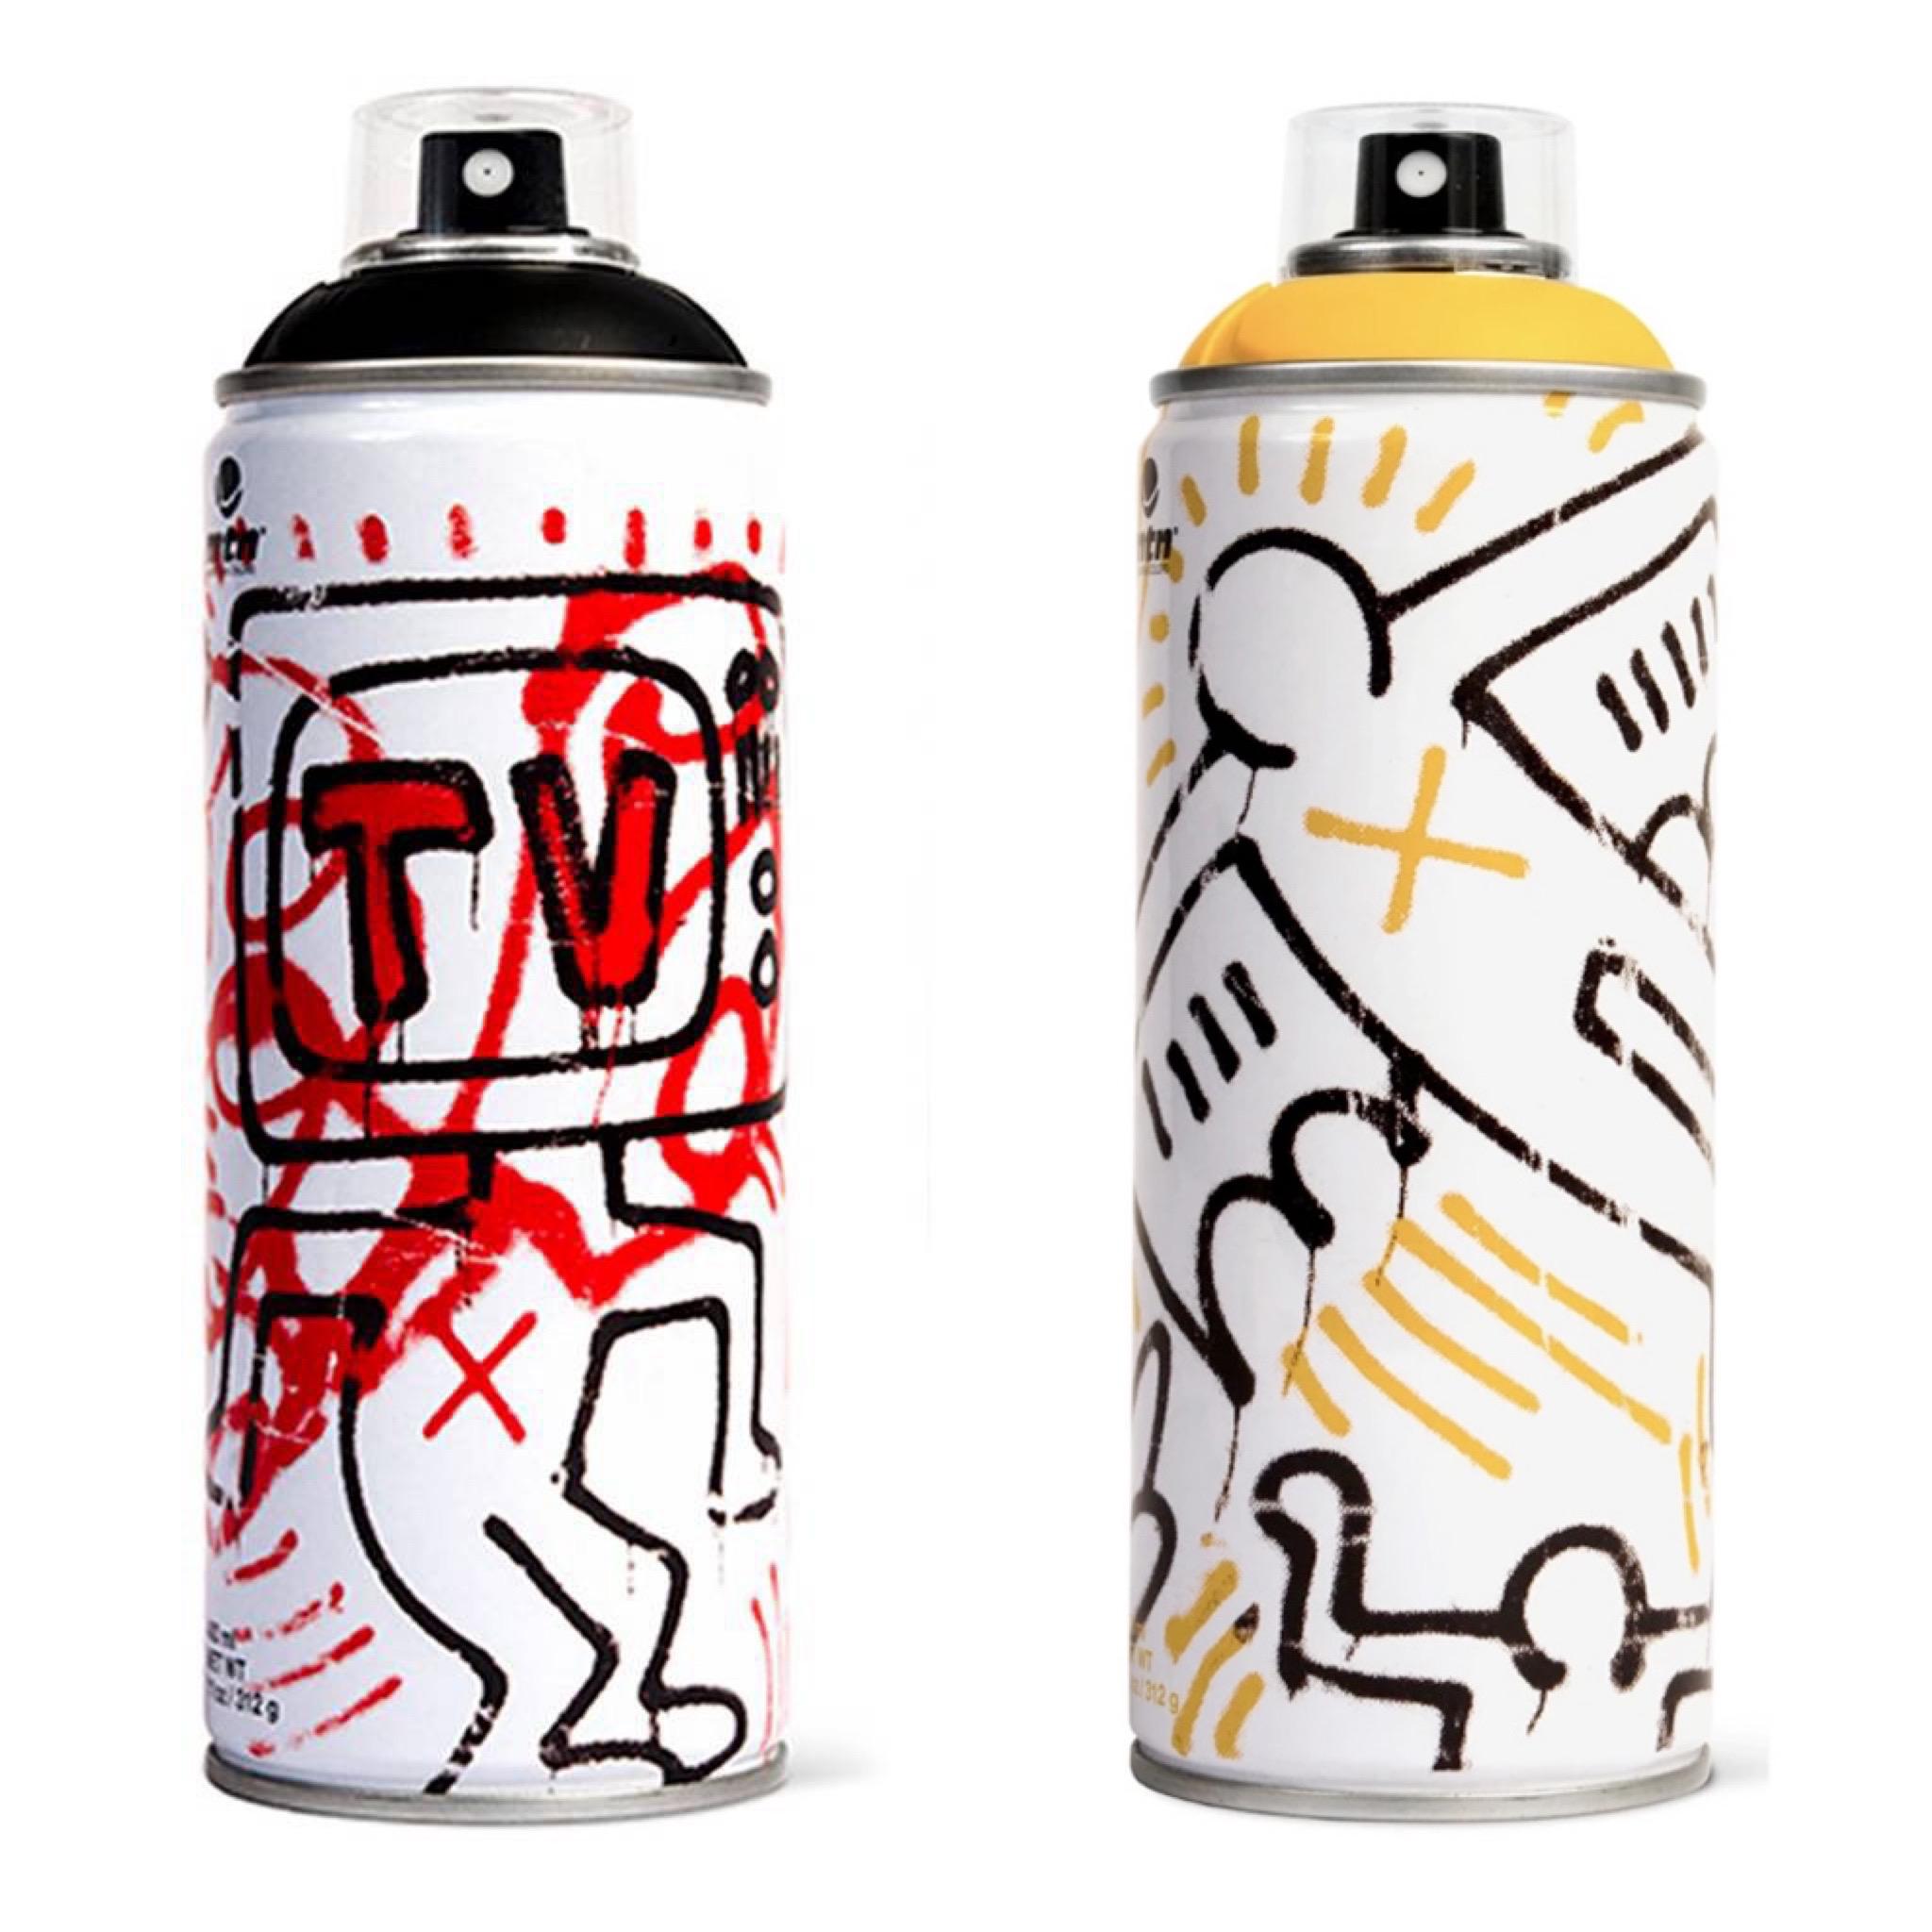 Limited edition Keith Haring spray paint can (set of 2) - Print by (after) Keith Haring